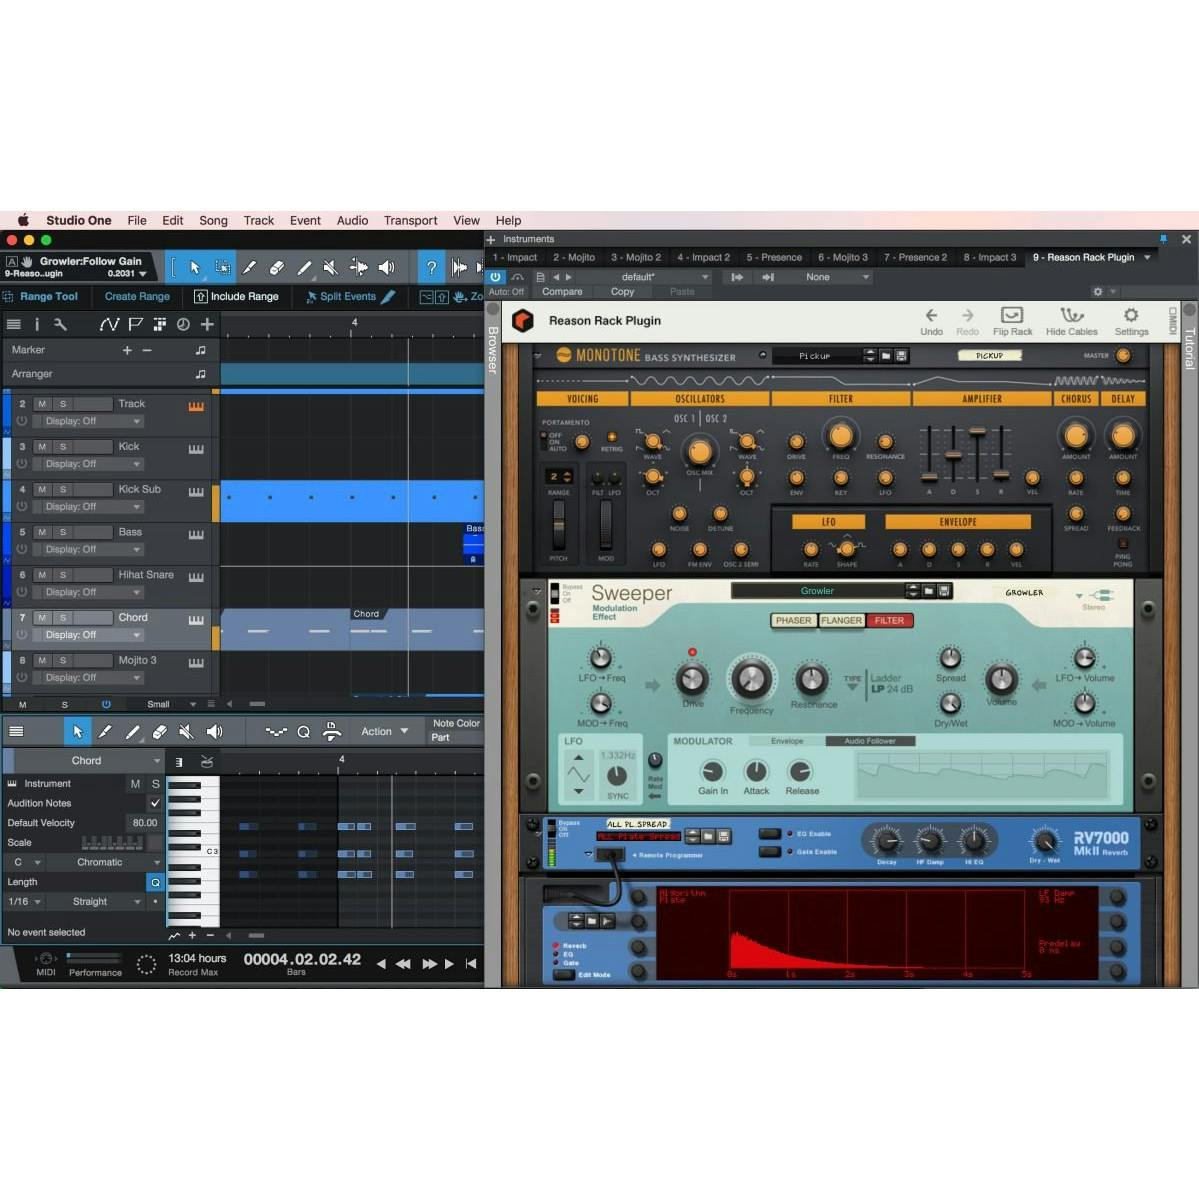 Propellerhead sound cards & media devices driver download for windows 7